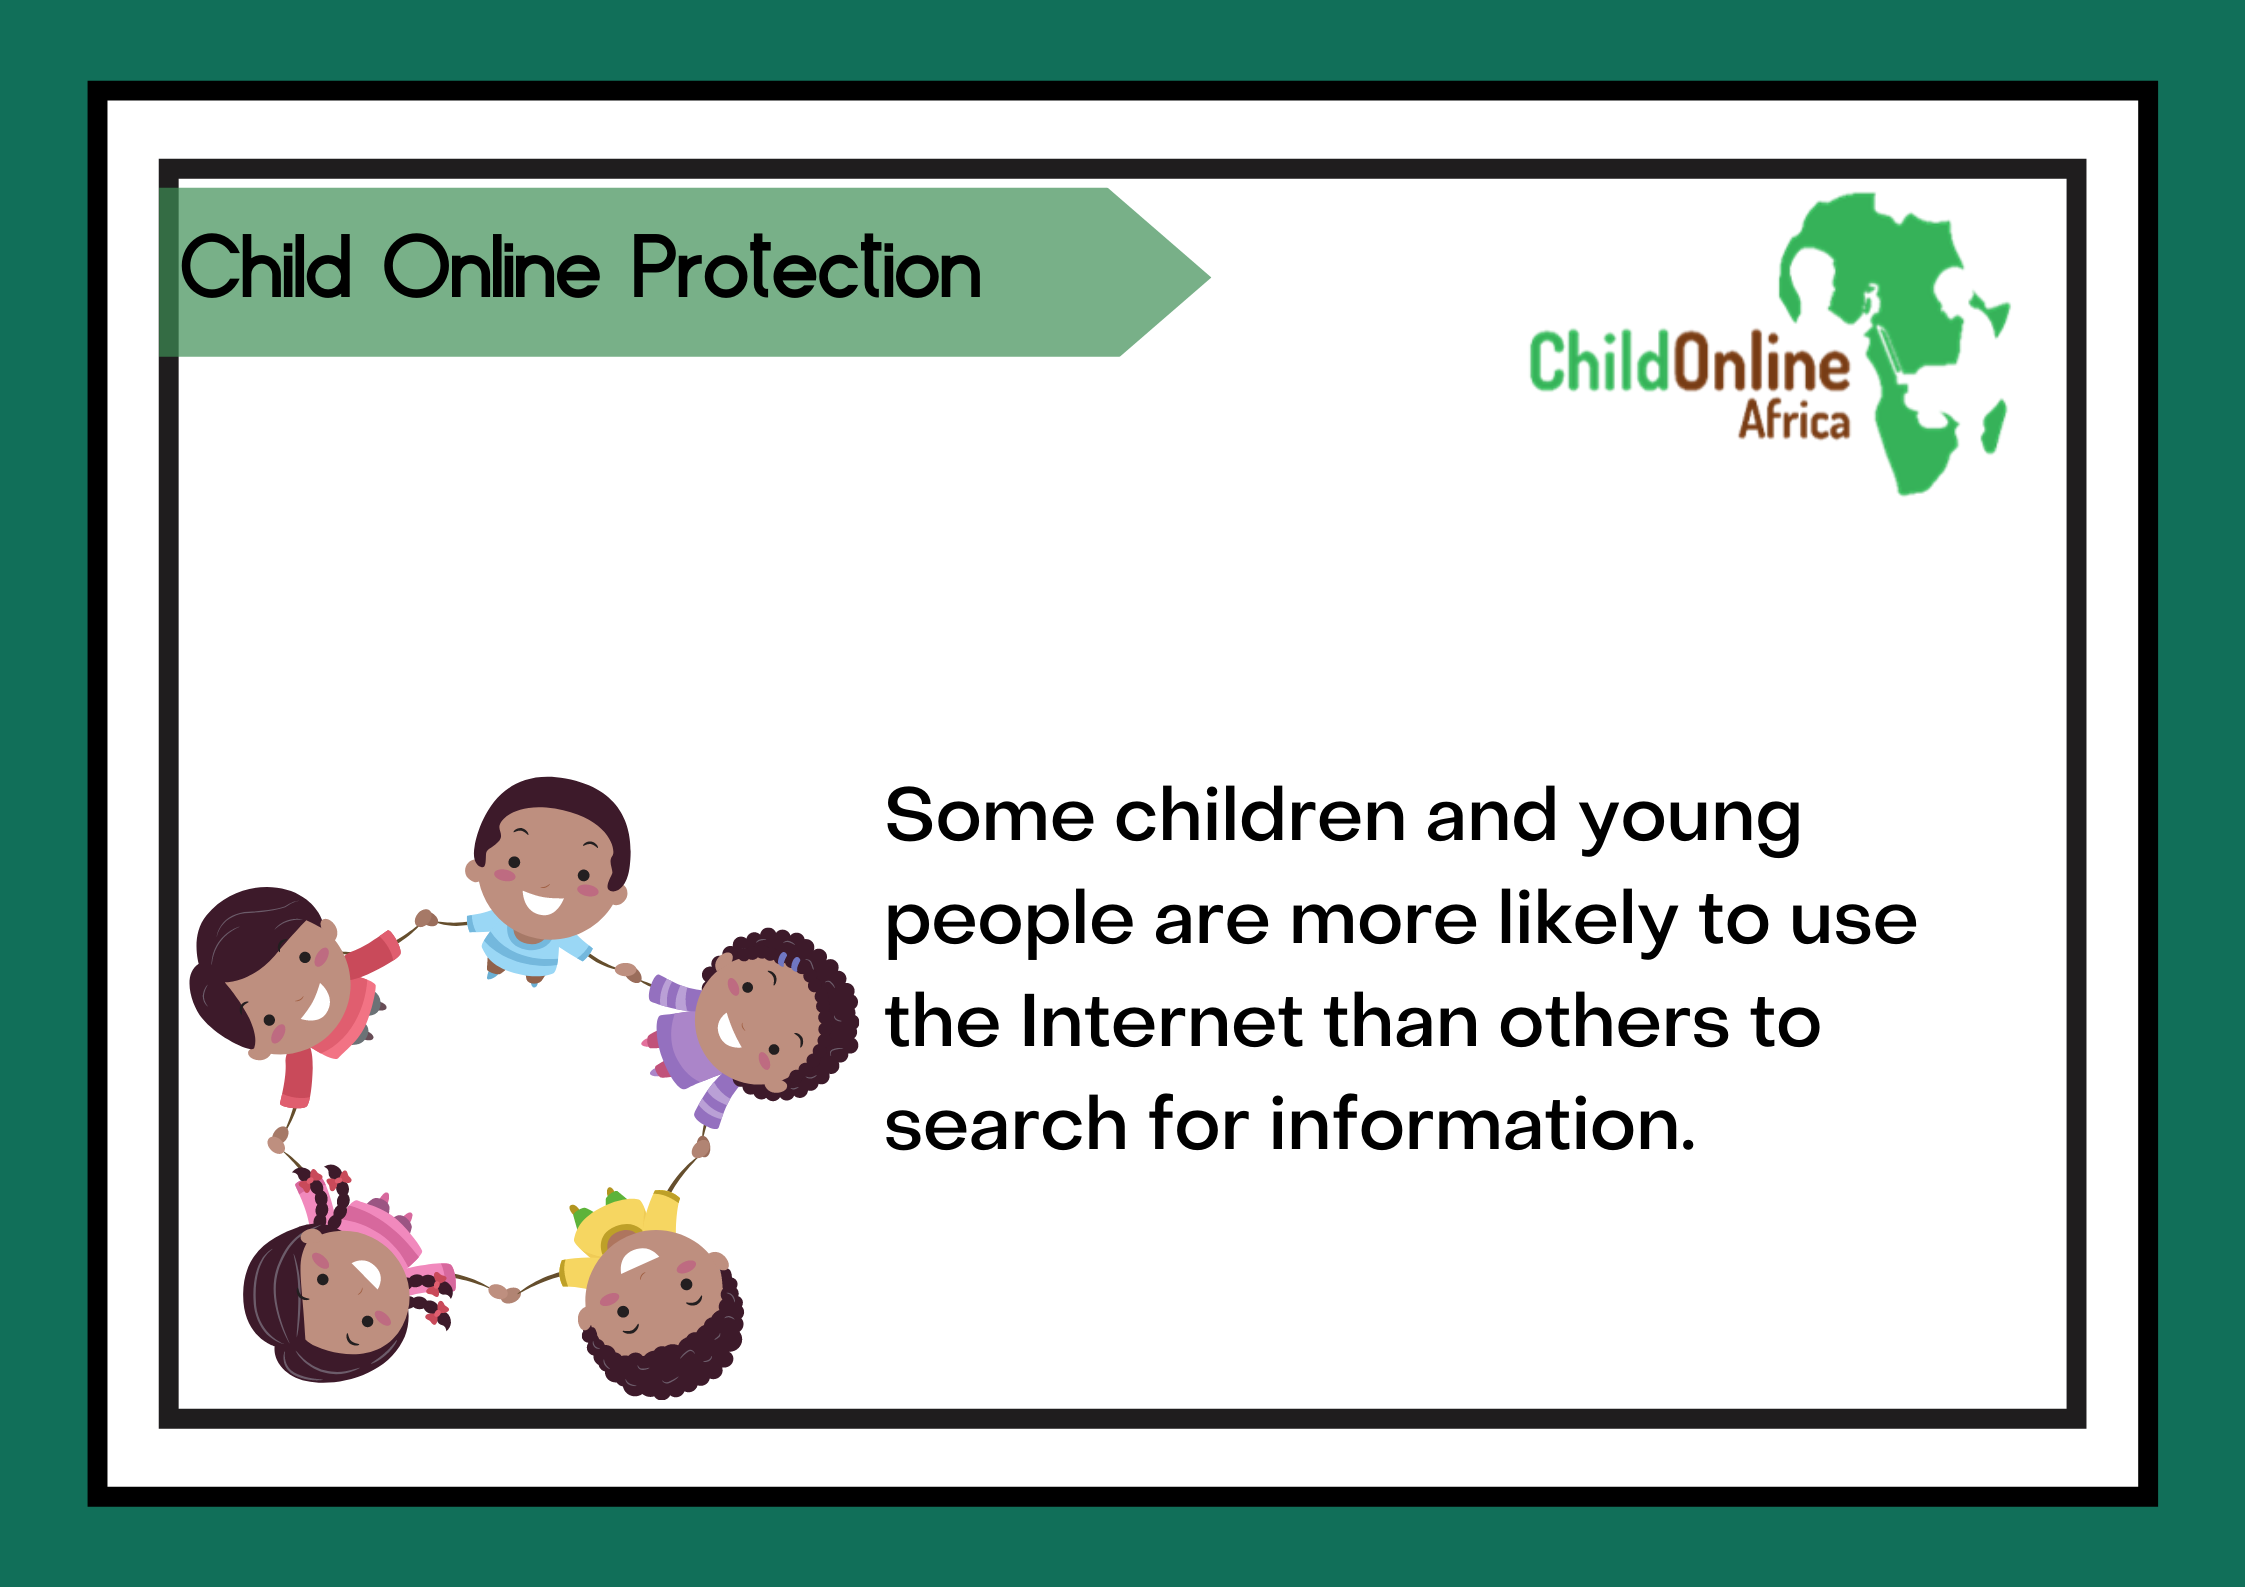 Child online protection needs